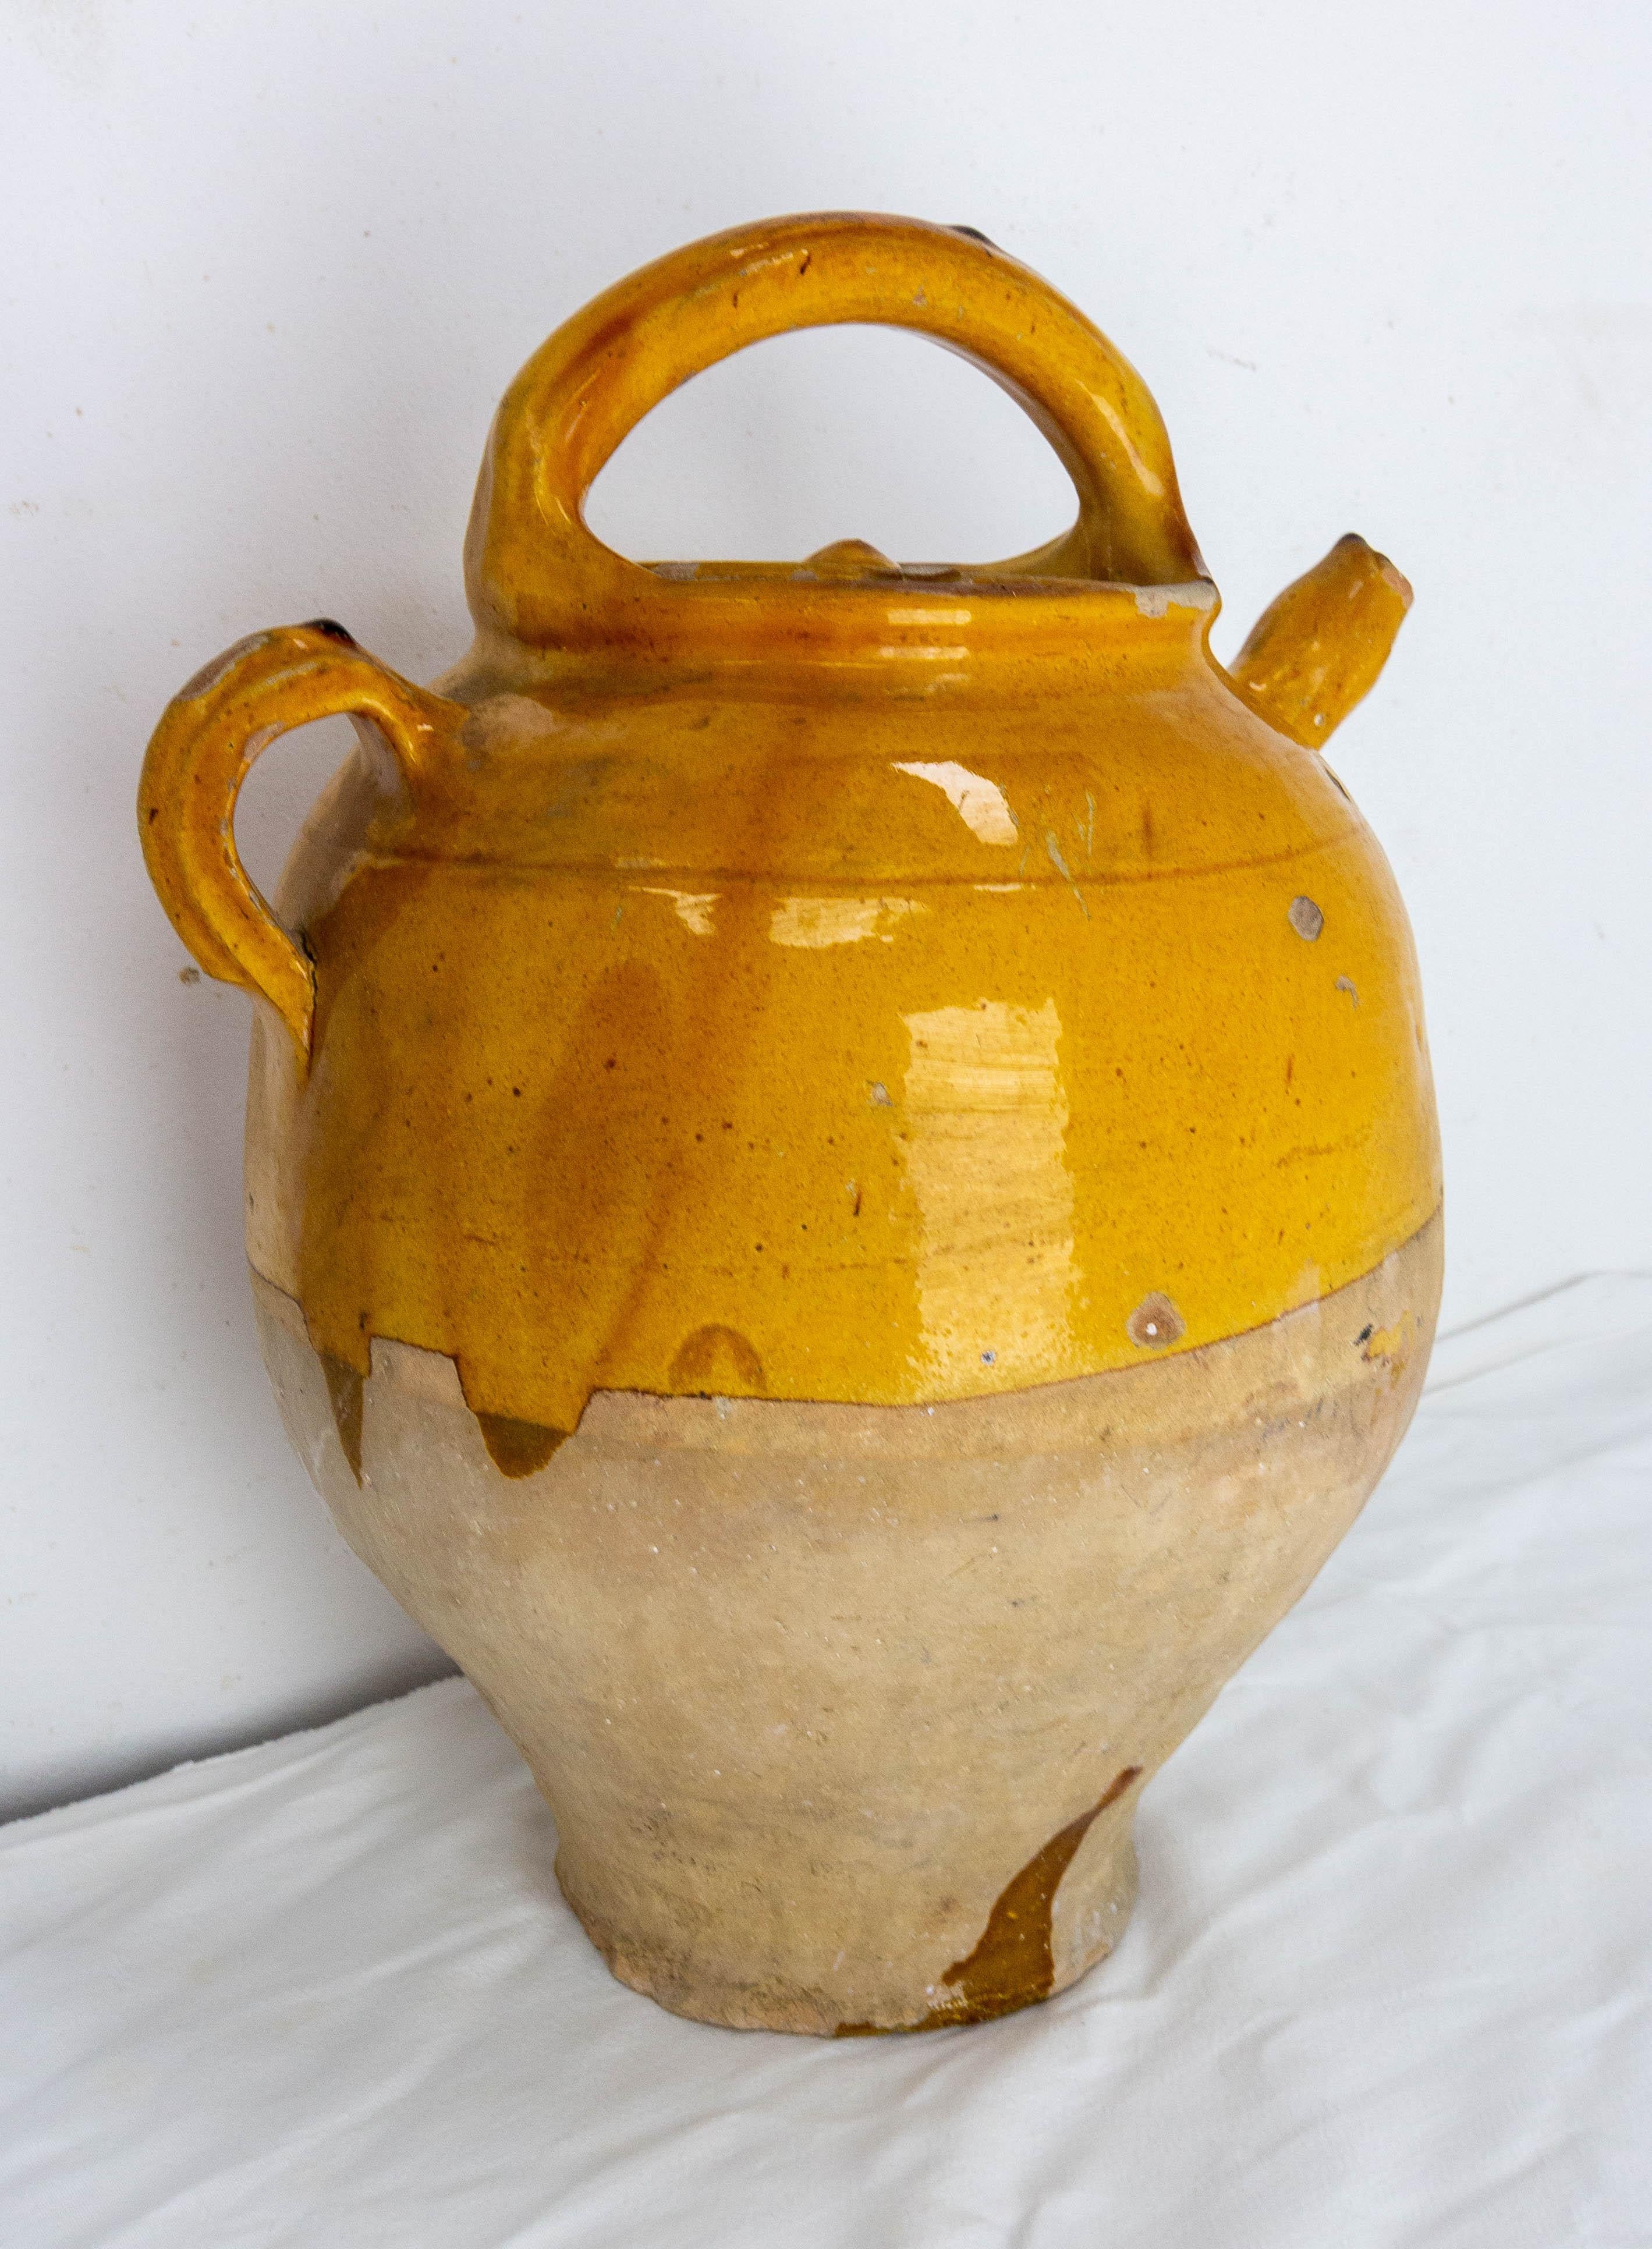 Terracotta jug with yellow glaze. This kind of pitcher was used to keep the water fresh, at a time when electricity did not exist.
Very decorative.
Good patina and bright yellow color.
Good antique condition with a small splinter on the collar,